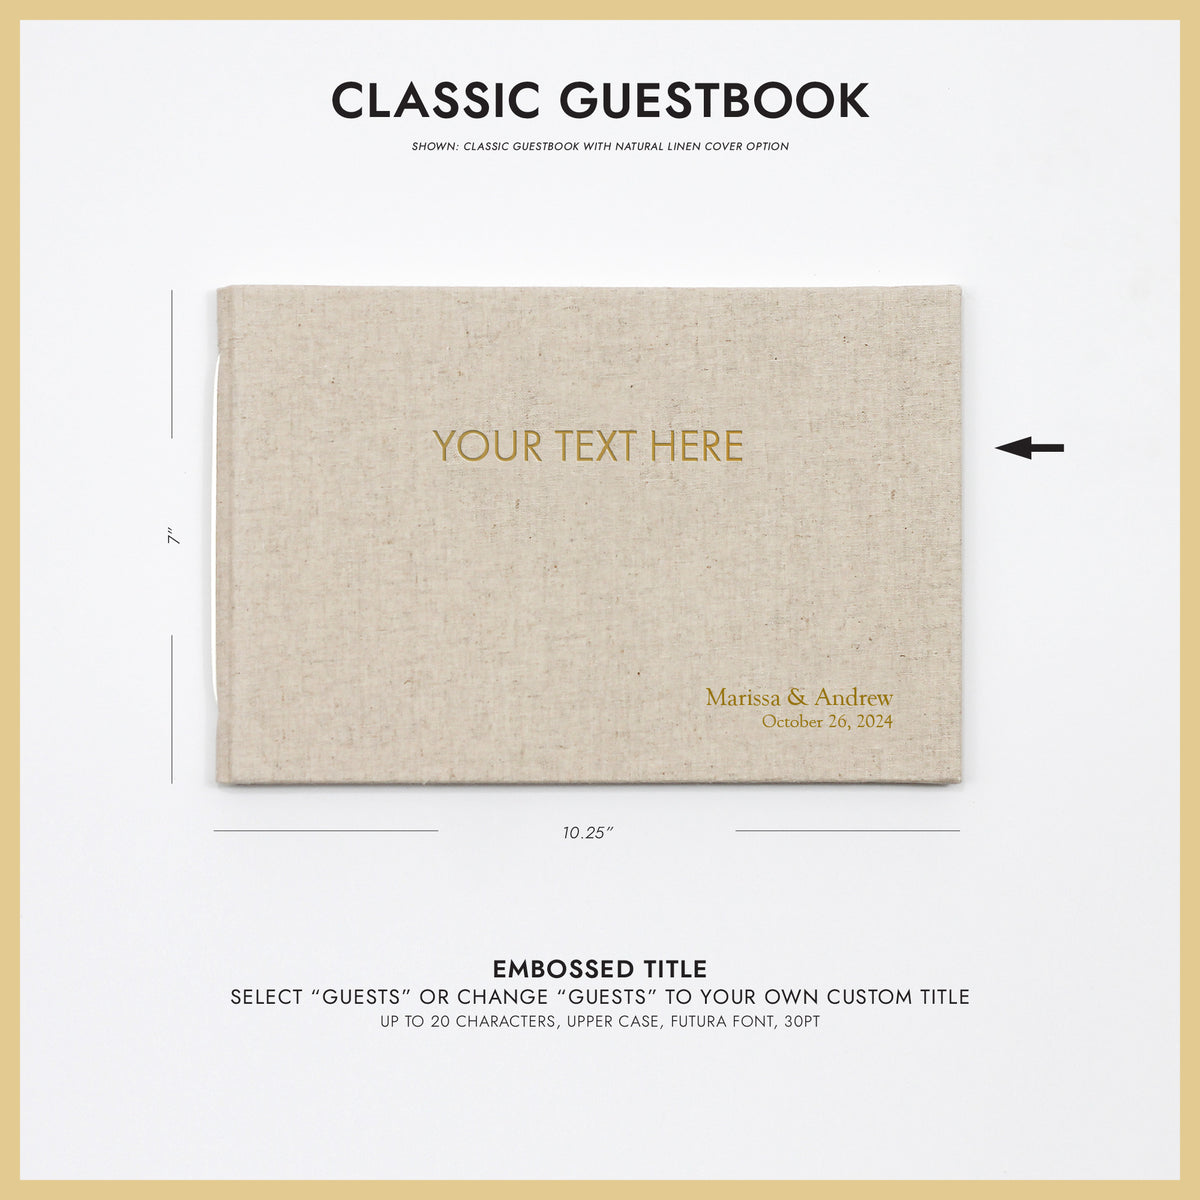 Classic Guestbook | Cover: Natural Linen | Available Personalized